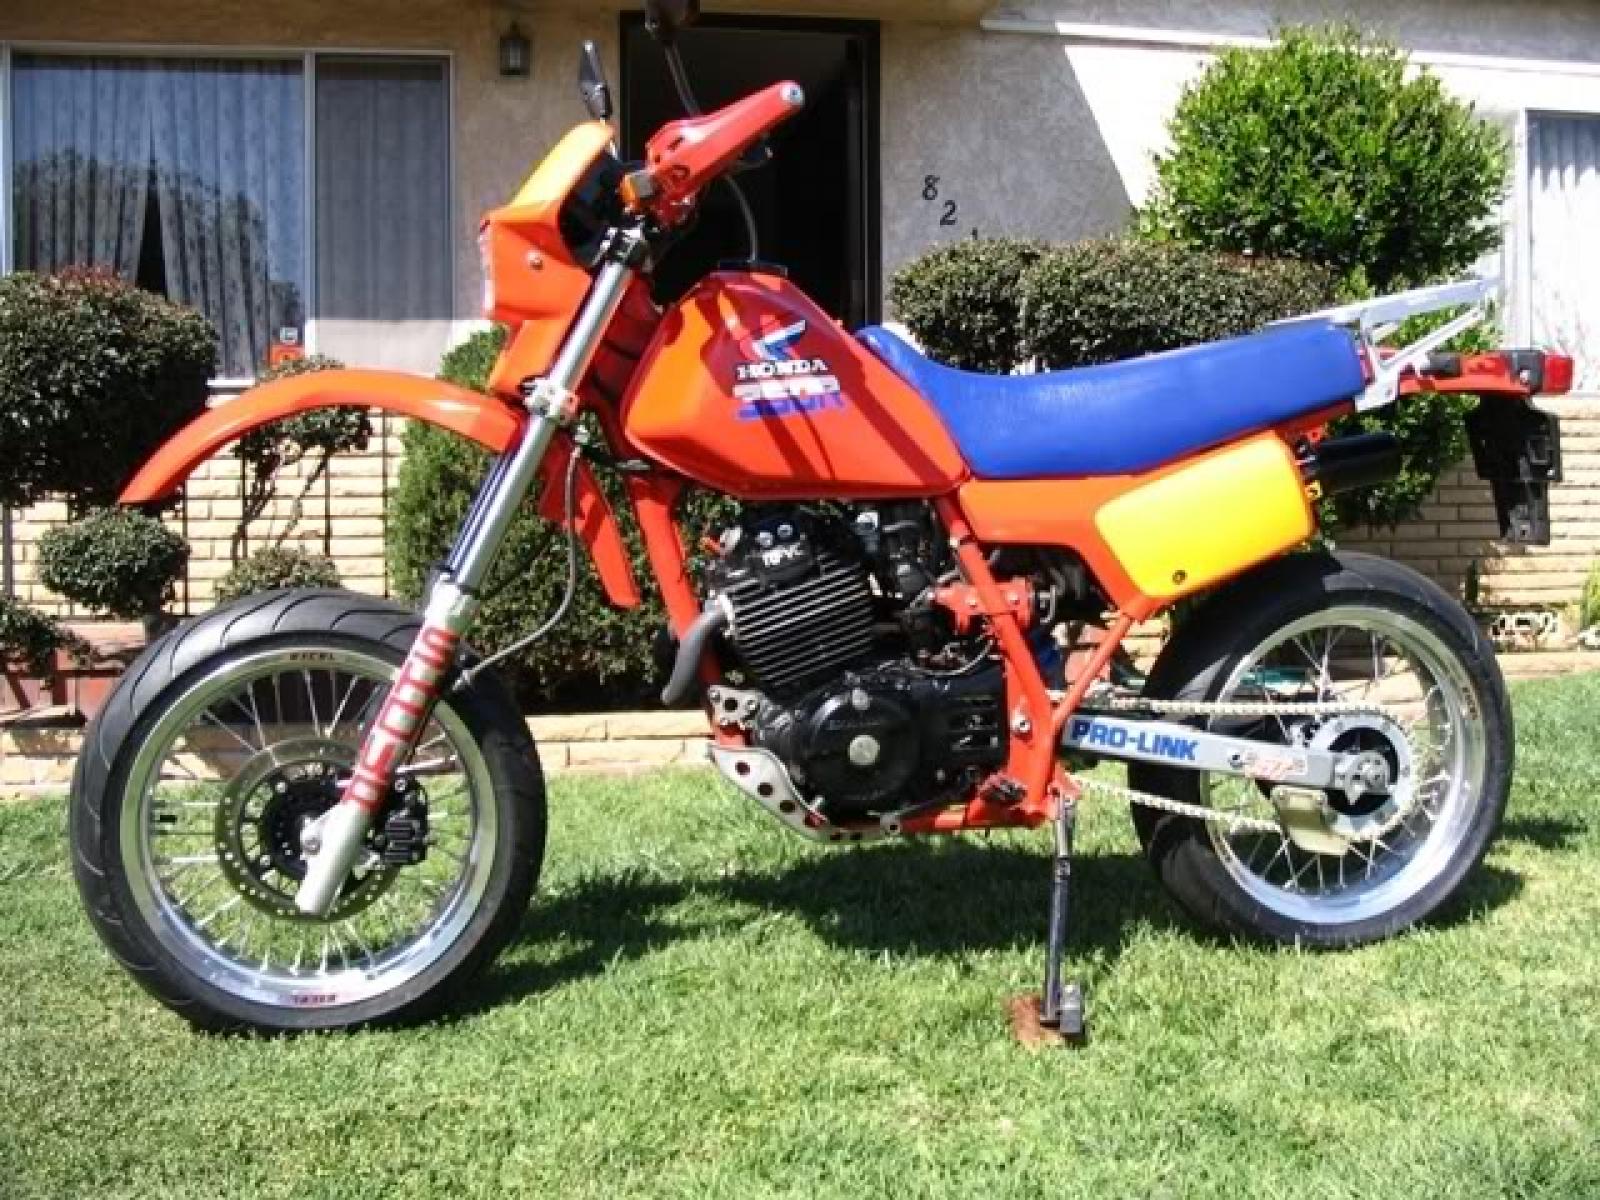 Review of Honda XL 350 R (reduced effect) 1986: pictures, live photos